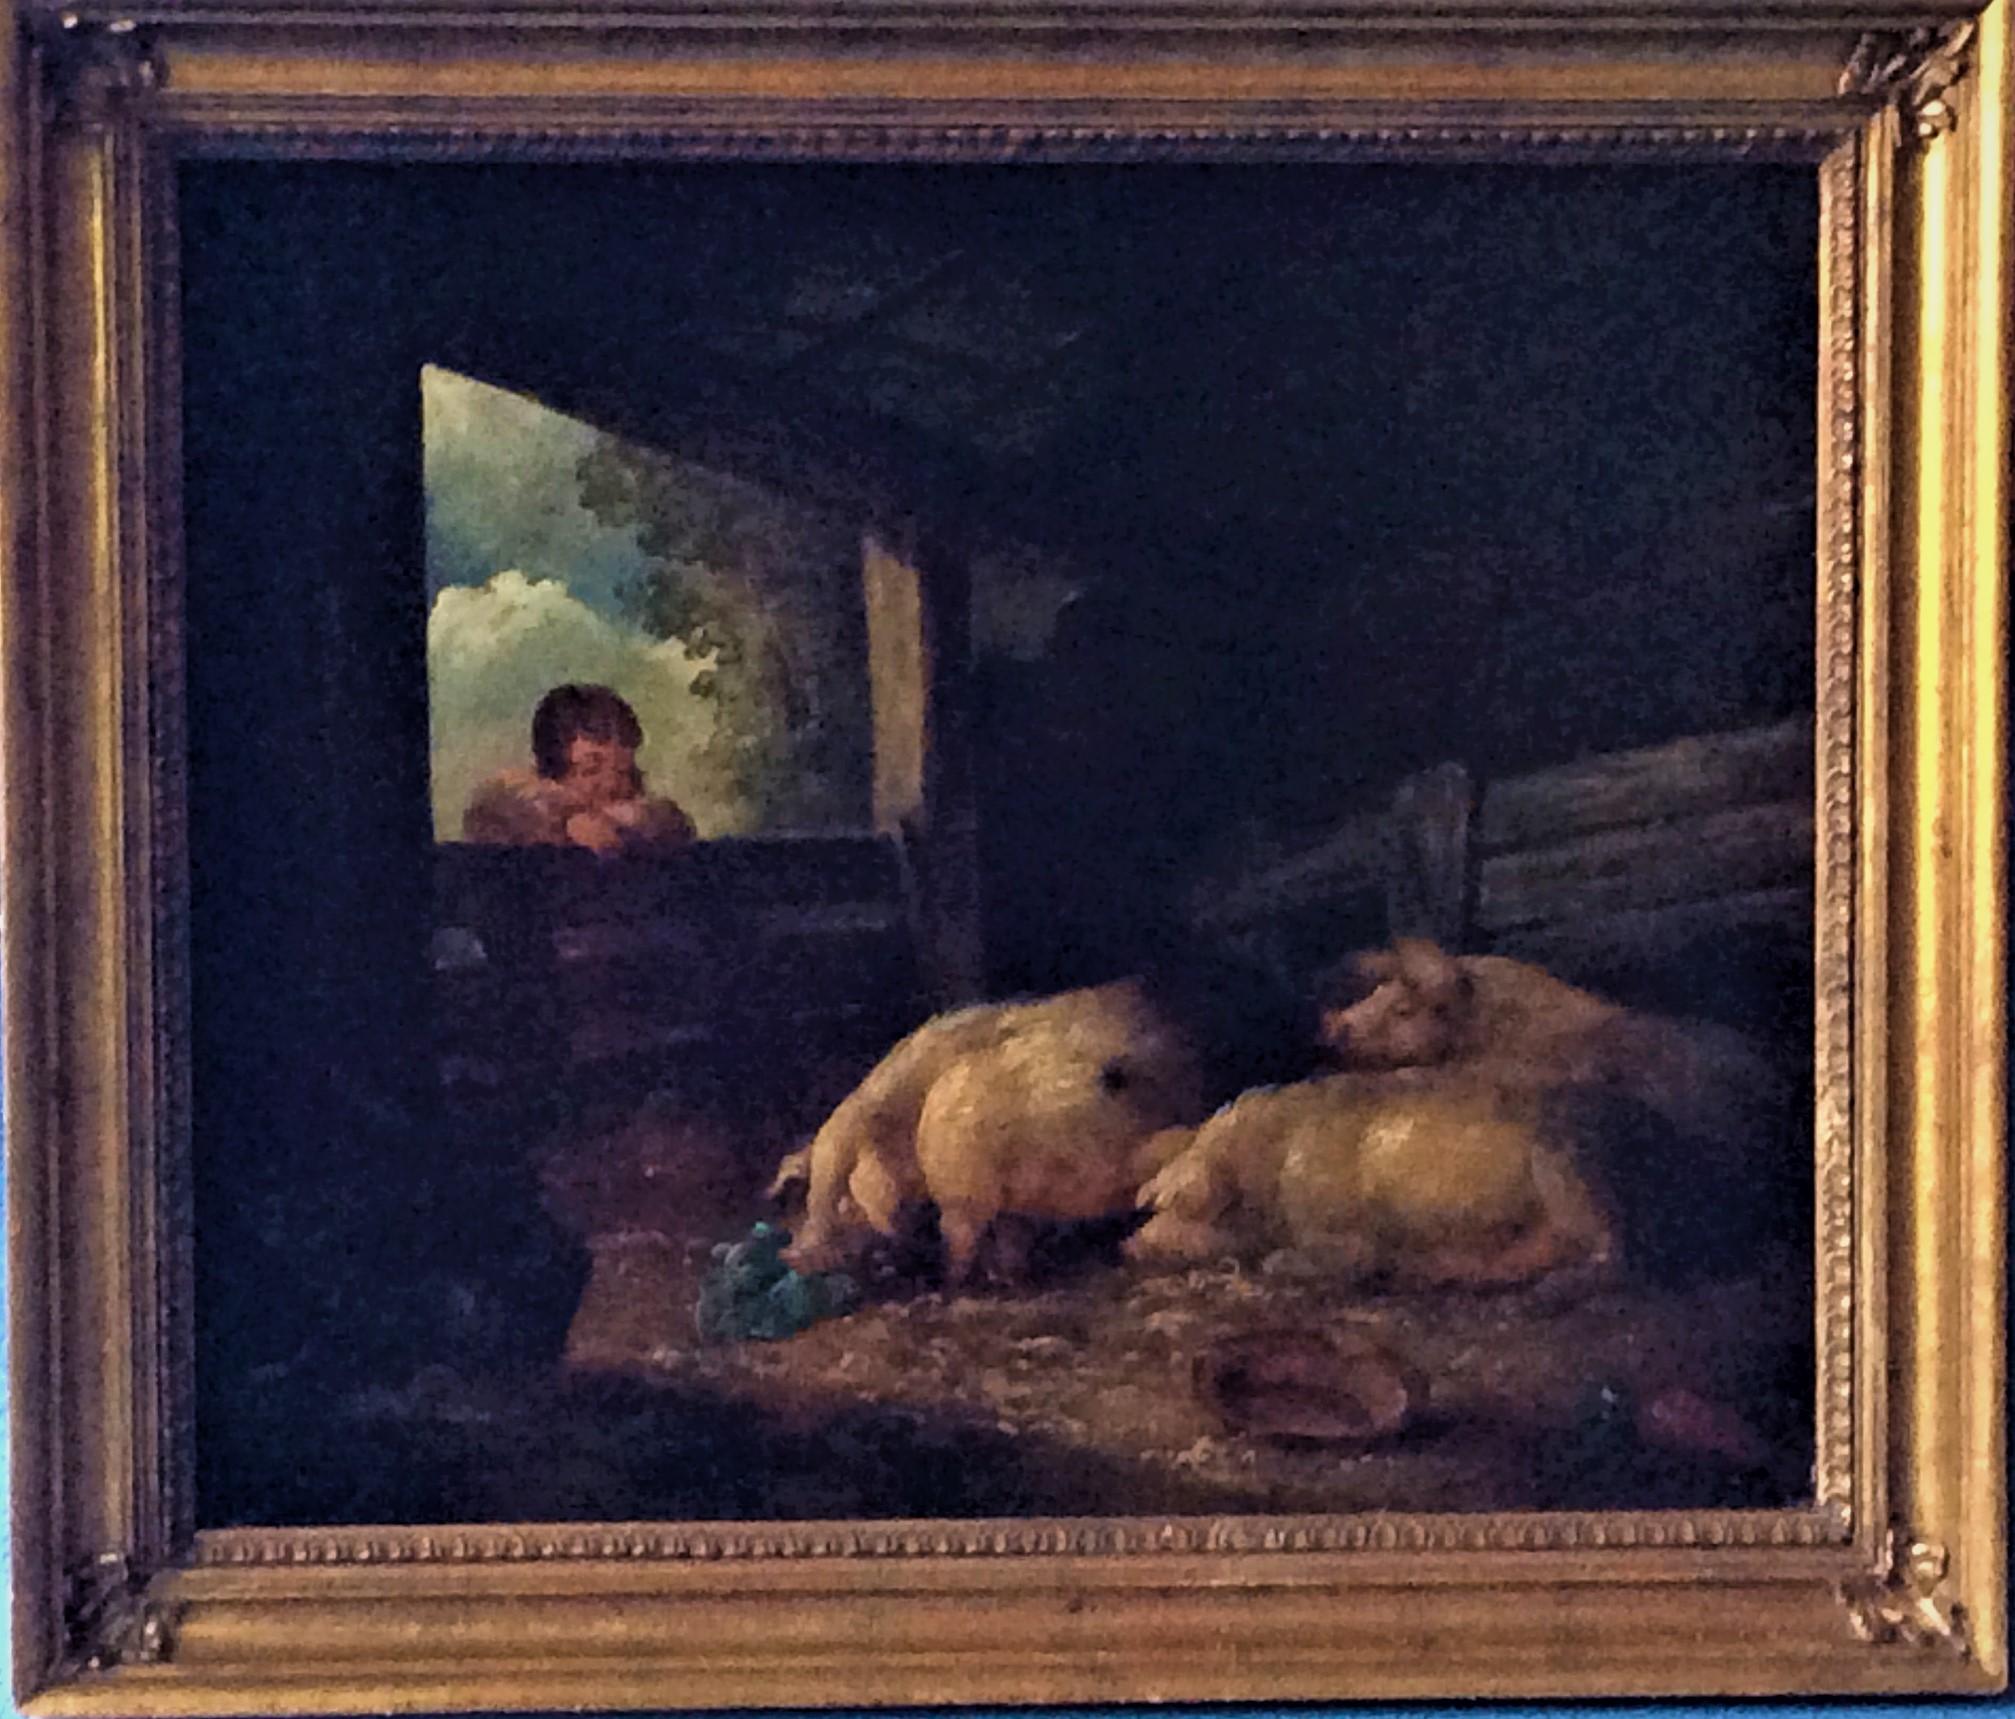 Pigs in a barn, country scene, 18th century landscape, Attributed George Morland - Painting by george Morland (attributed to)